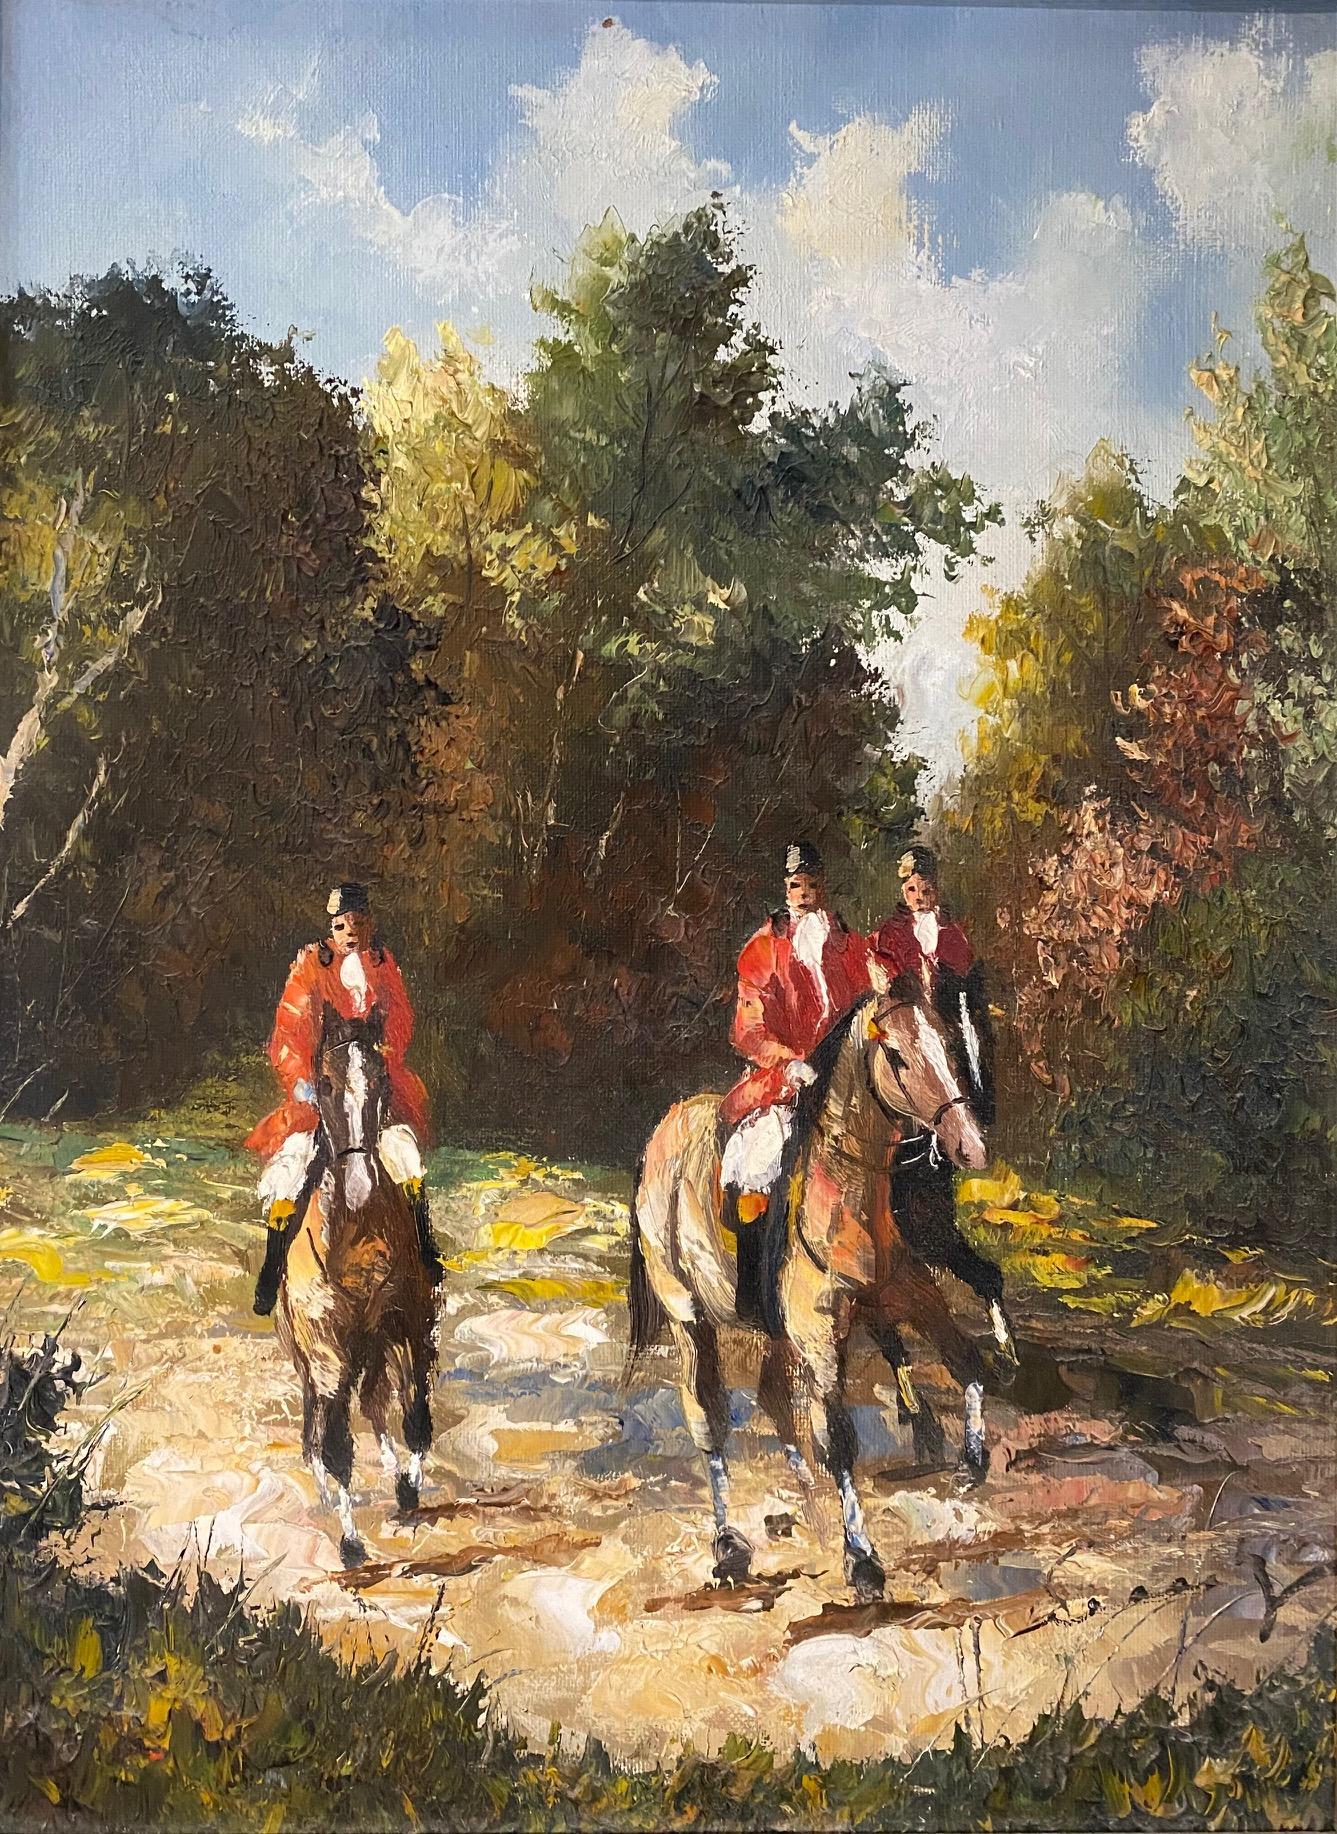 Royal horsemen - Oil on canvas 41x30 cm - Painting by Unknown